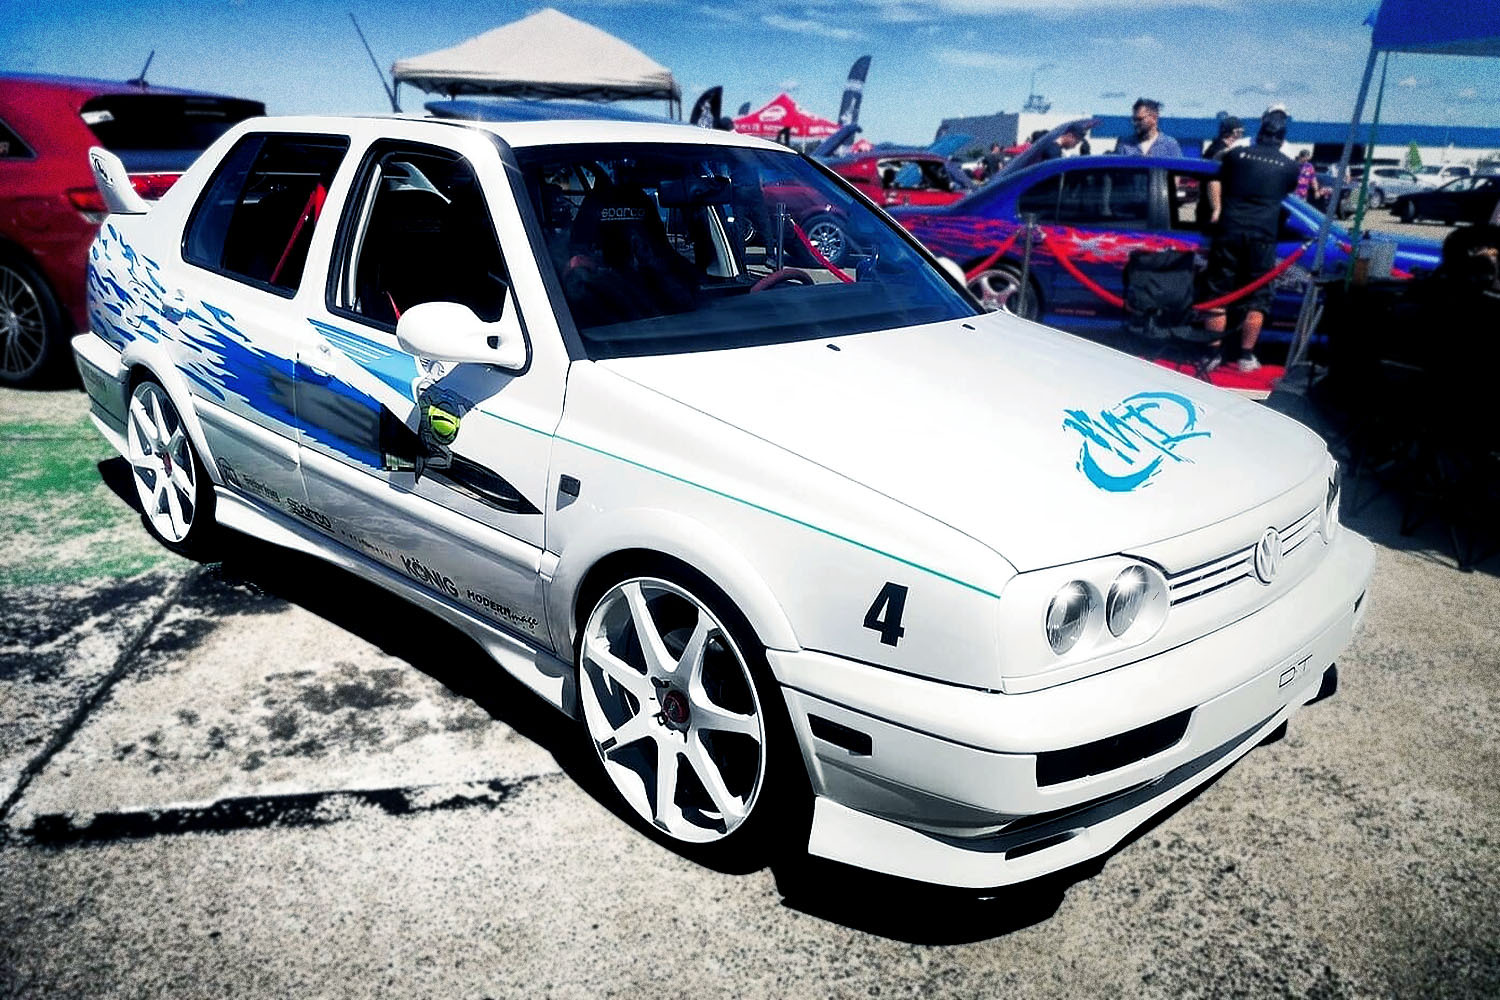 A replica of the white Volkswagen Jetta driven by Jesse (Chad Lindberg) in the first Fast and Furious movie, built by Dominic Dubreuil